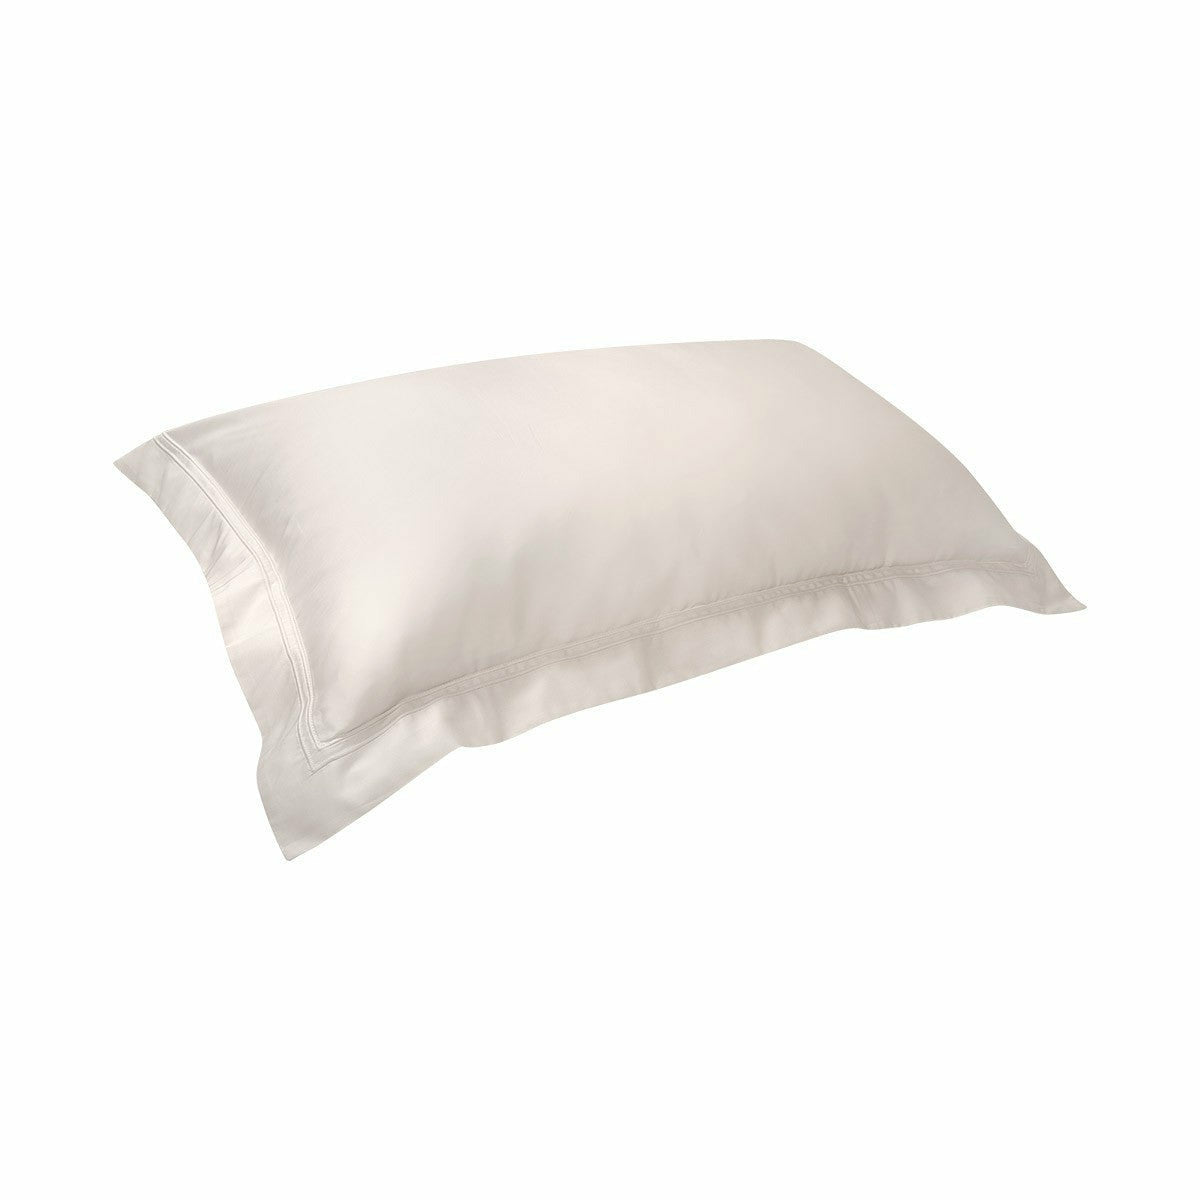 Pillowcase of Yves Delorme Triomphe Bedding in Nacre Color